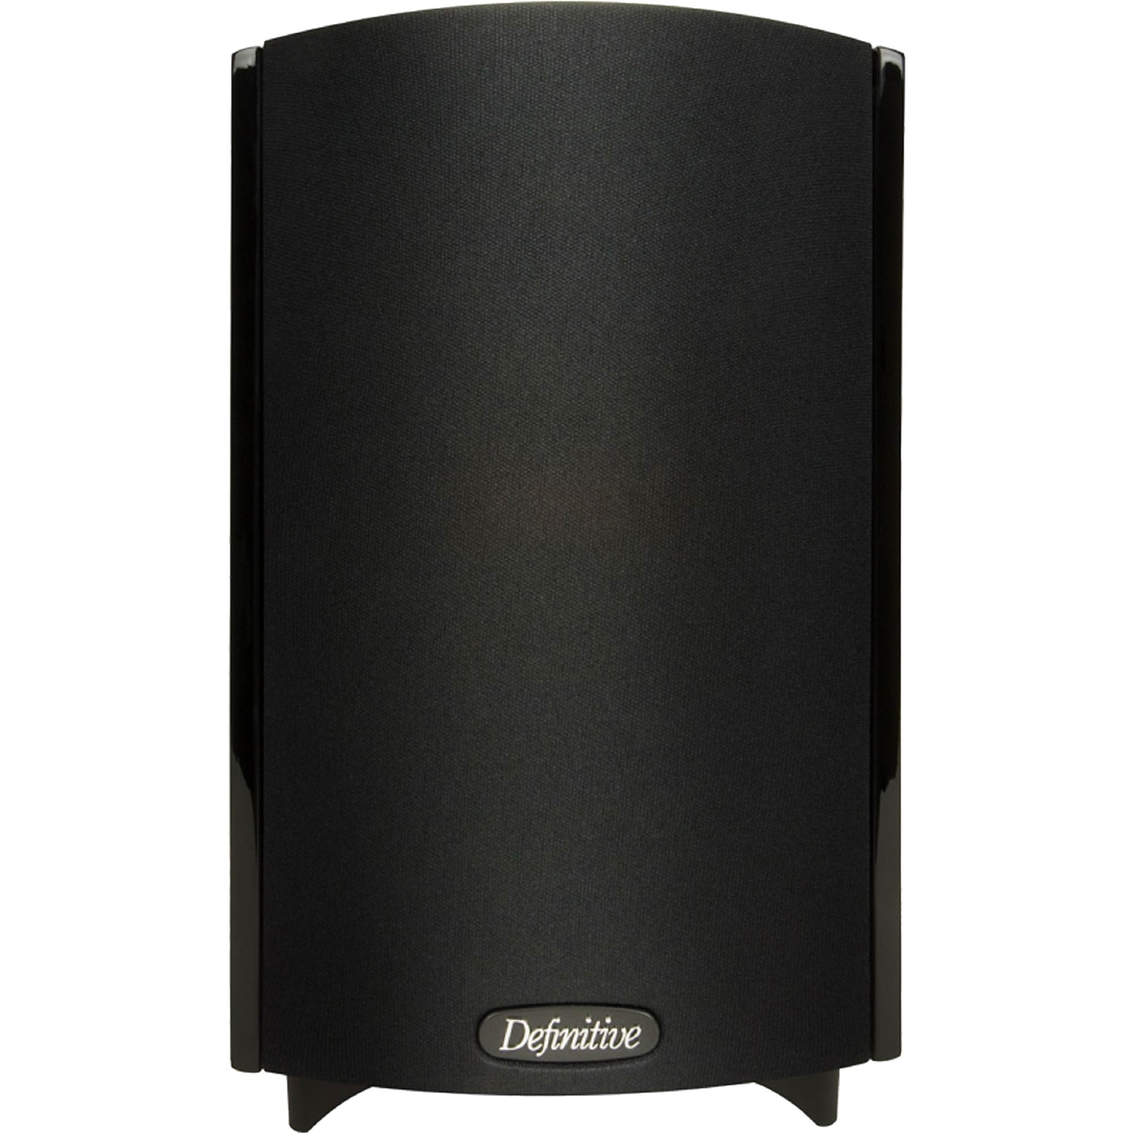 Definitive Technology Compact High Definition Satellite Speaker - Image 2 of 3